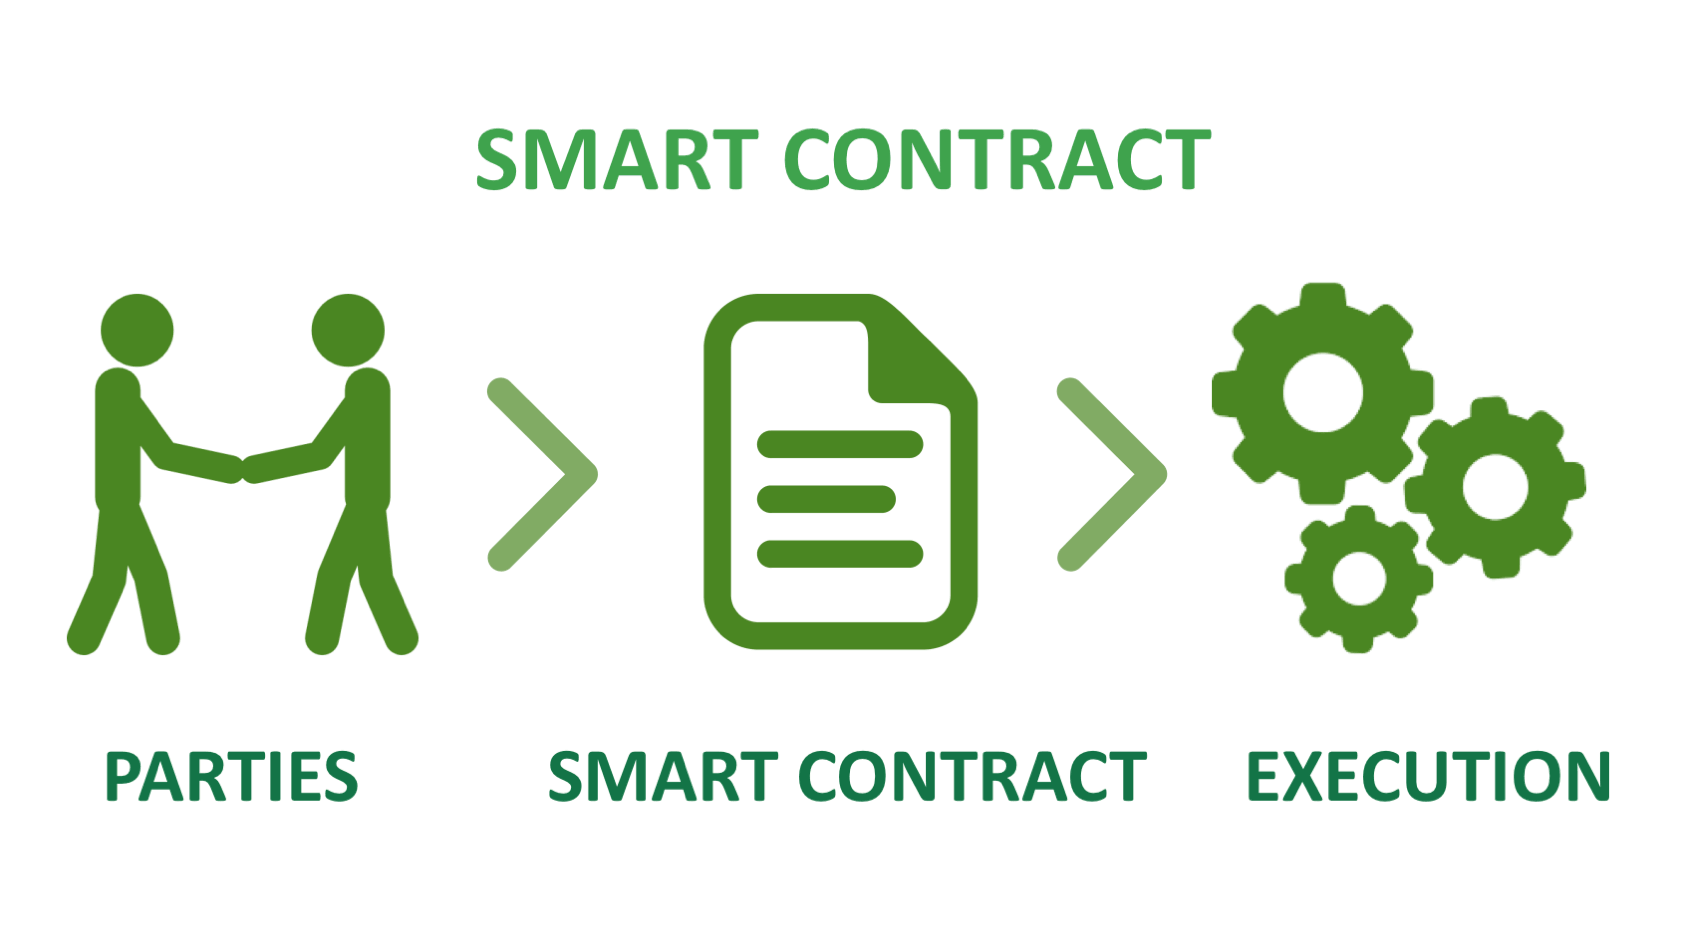 Major types of smart contracts